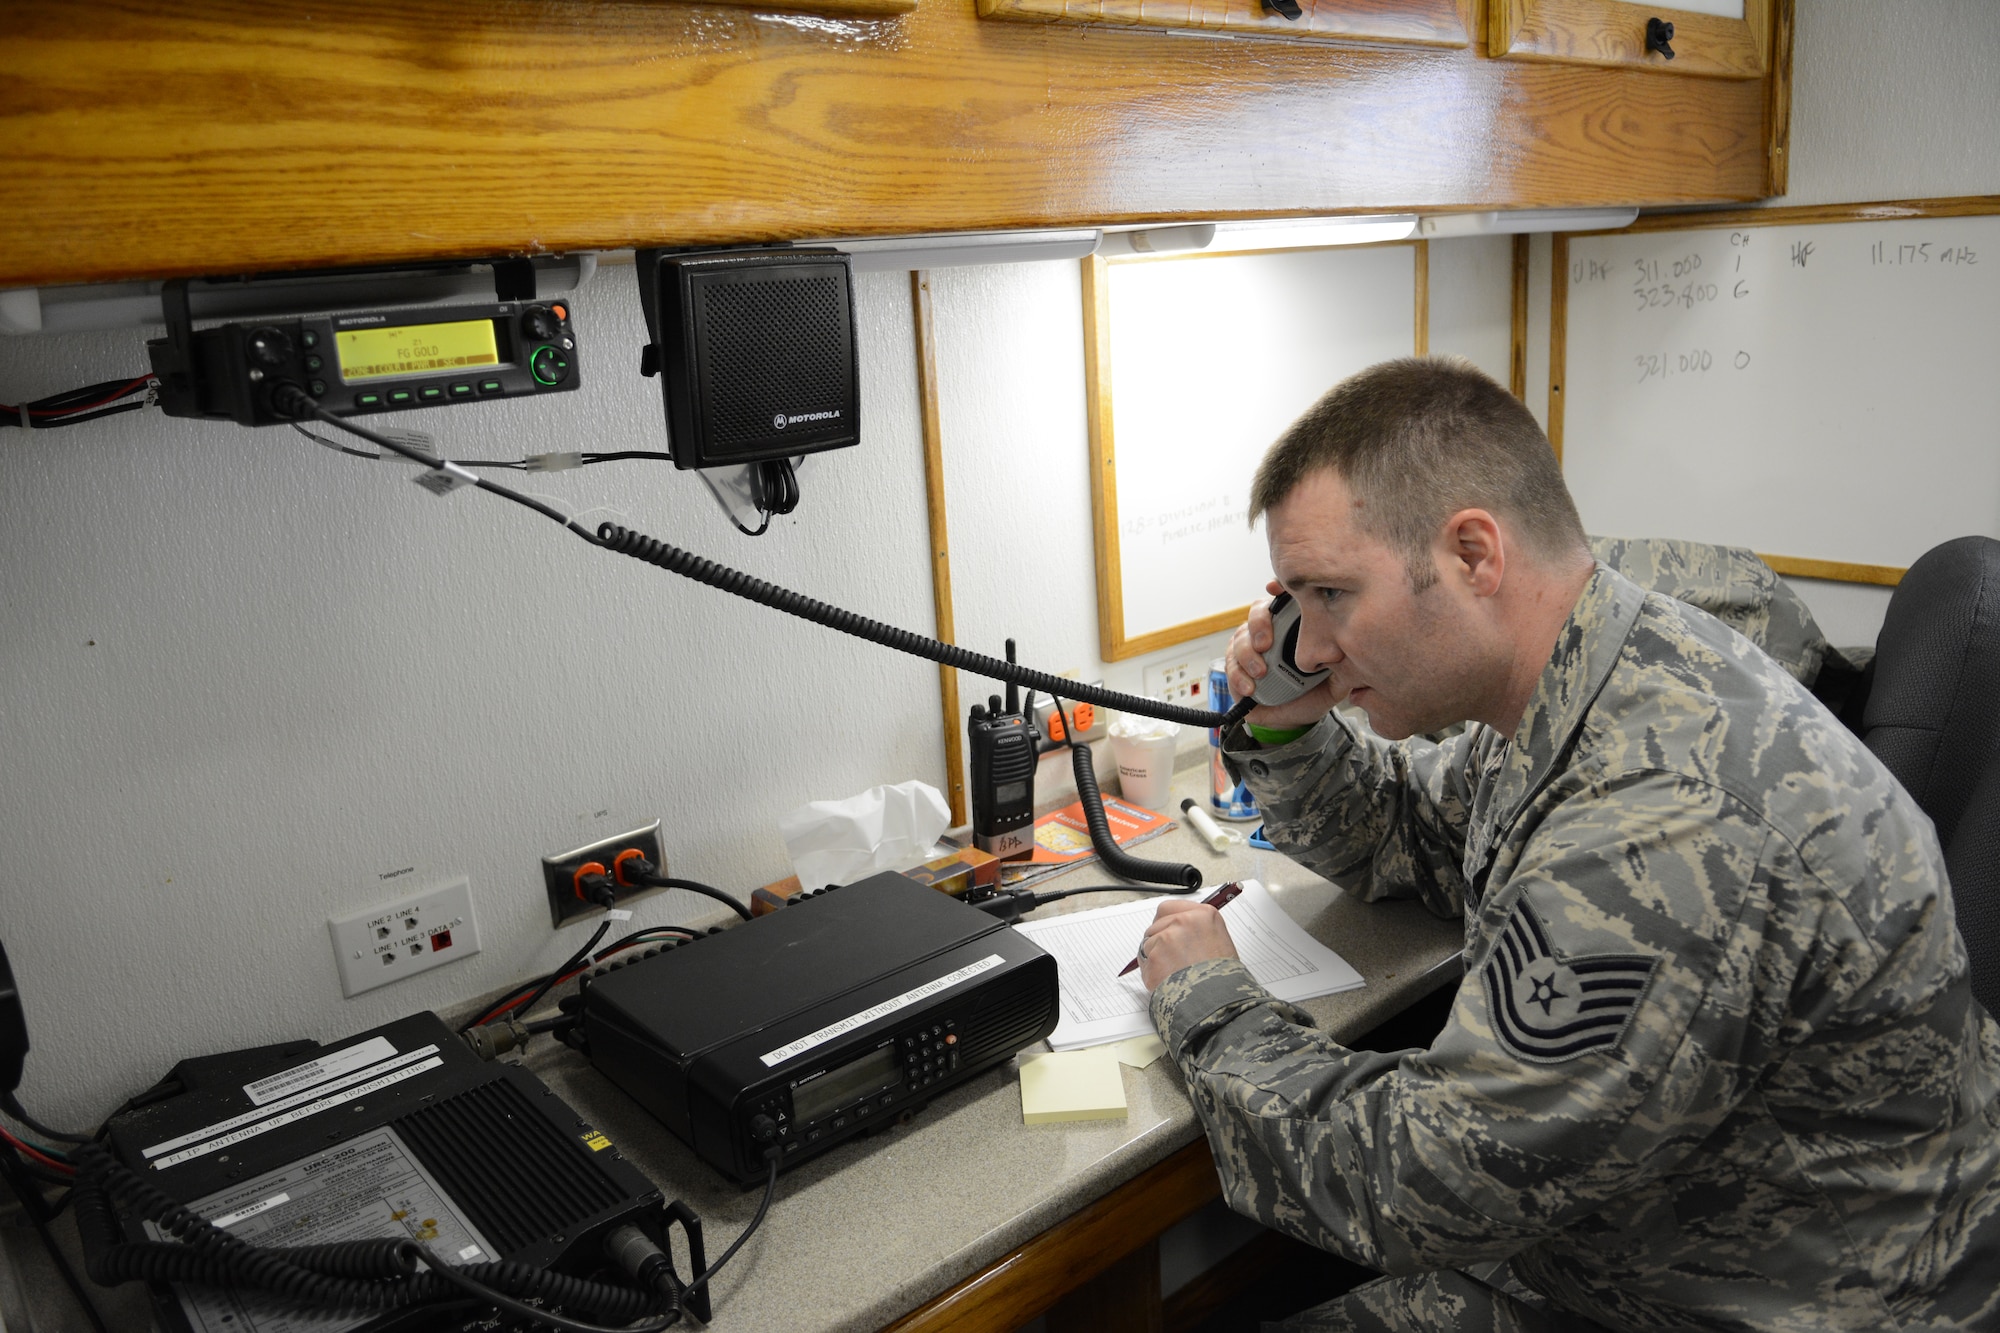 Tech. Sgt. Nathan Thrun, 128th Emergency Management program manager, listens to his radio during an exercise at the 2014 State Interoperable Mobile Communications Exercise in Oshkosh, Wis., May 15, 2014. Members of the Wisconsin National Guard tested their ability to communicate with other agencies. The 128th ARW also tested their ability to communicate with those in helicopters flying above the exercise site. (Air National Guard photo by Senior Airman Andrea F. Liechti)